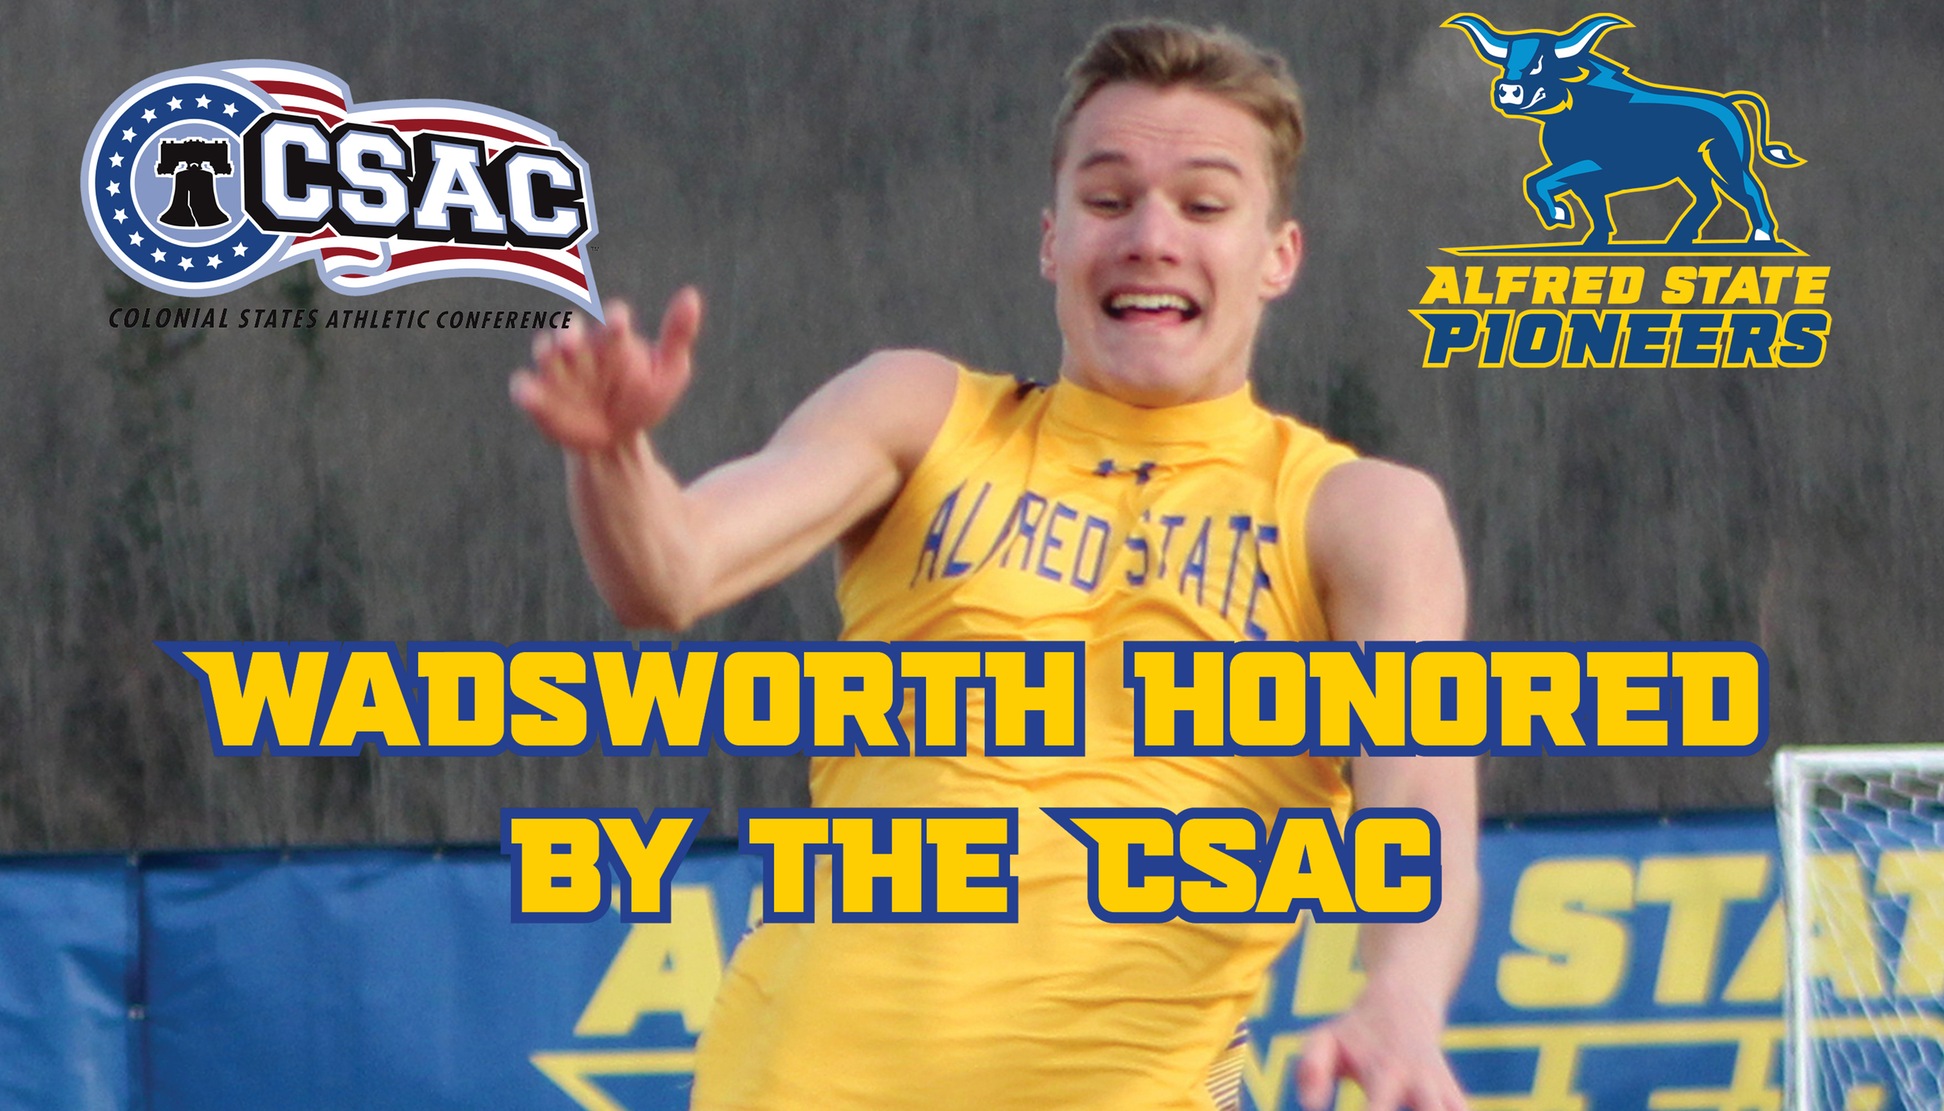 Jacob Wadsworth Named Track Athlete of the Week by the CSAC